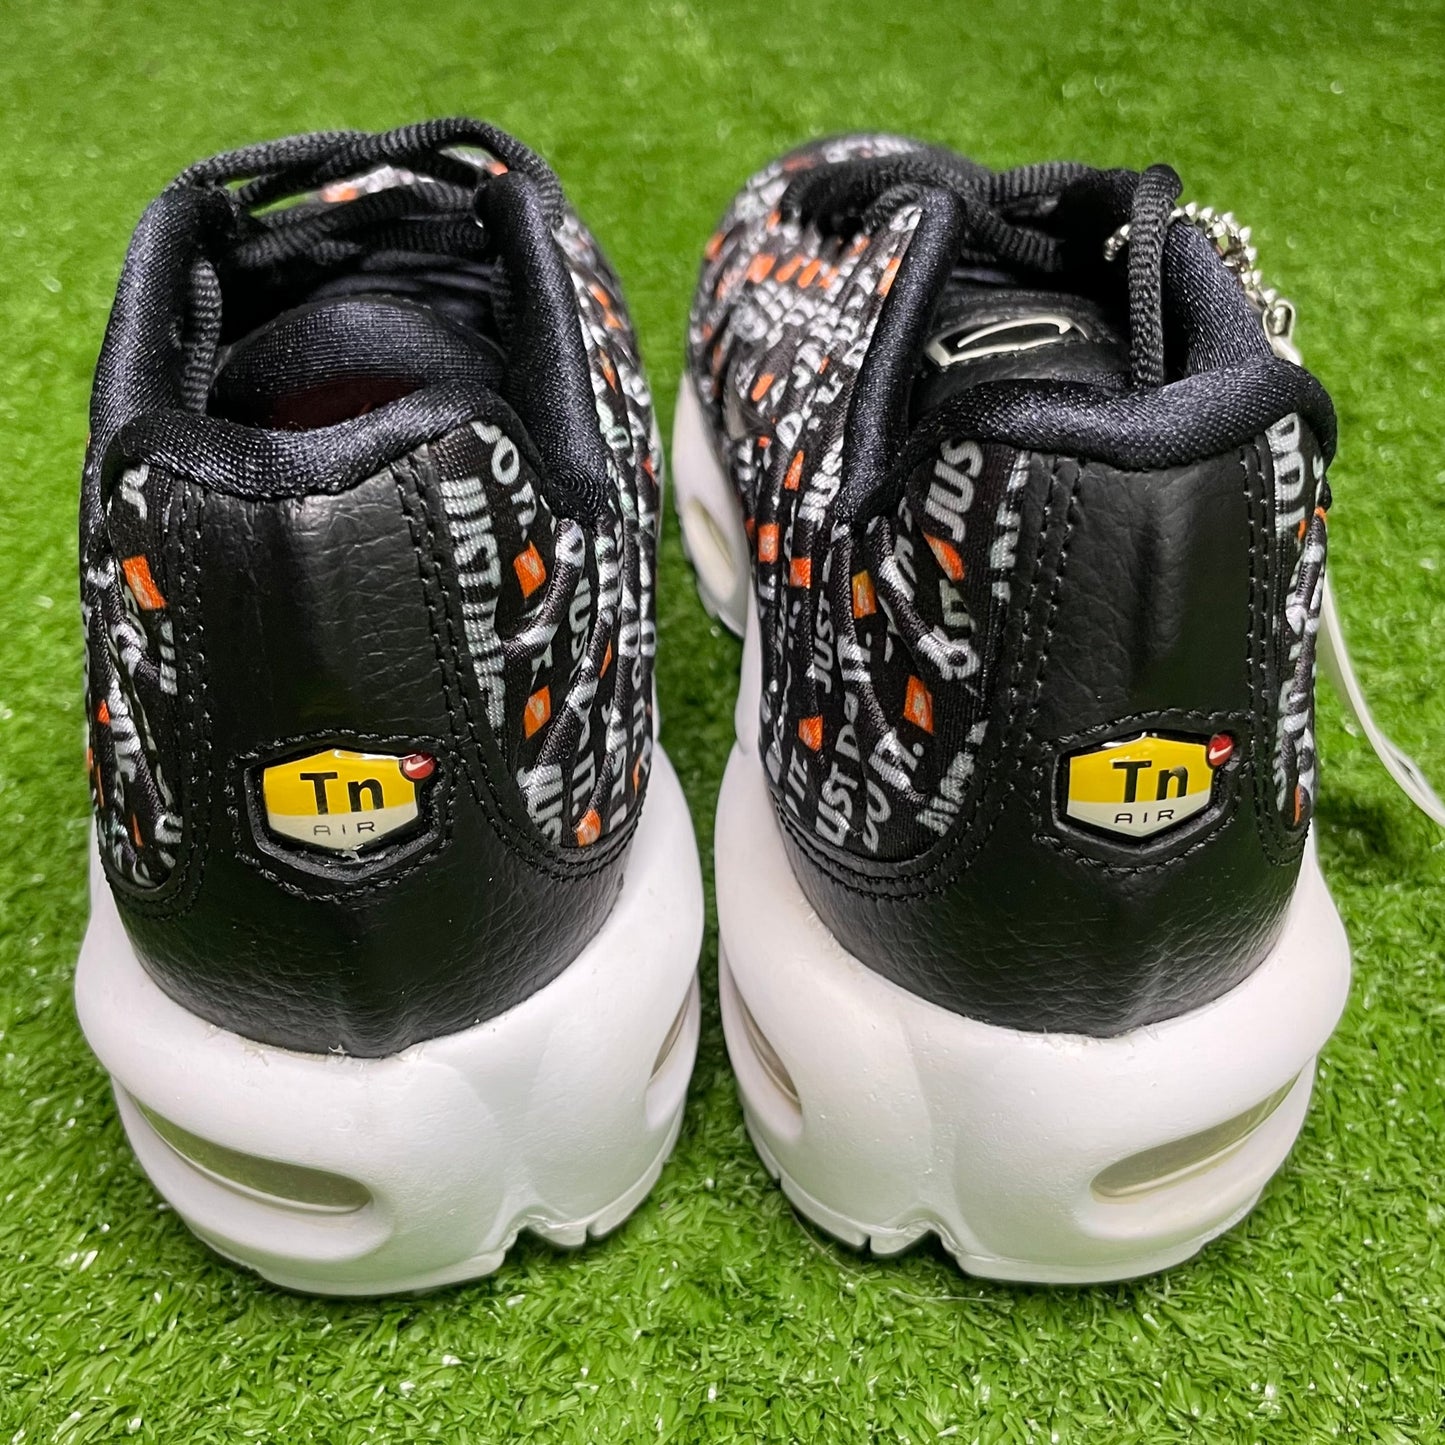 Nike Air Max Plus "Just Do It" (W)